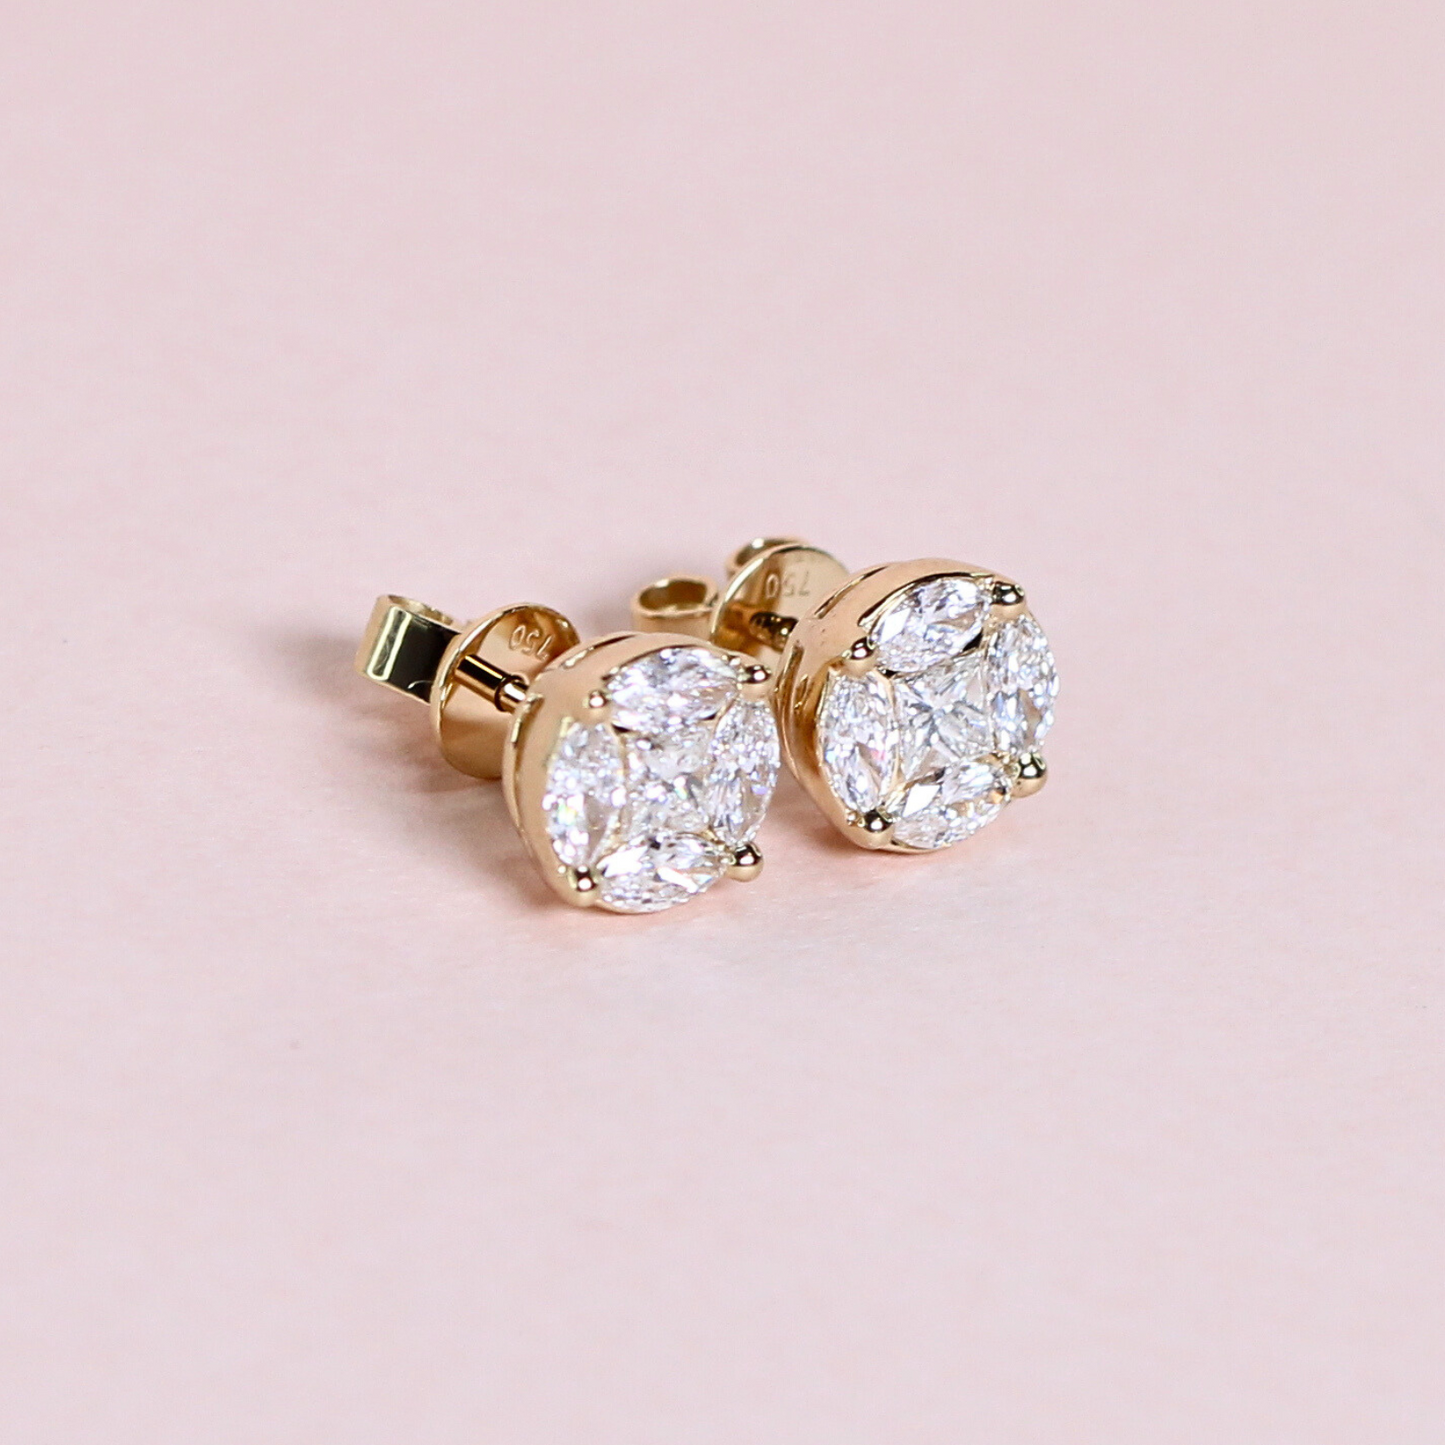 1.20cts First Generation Diamond Earrings